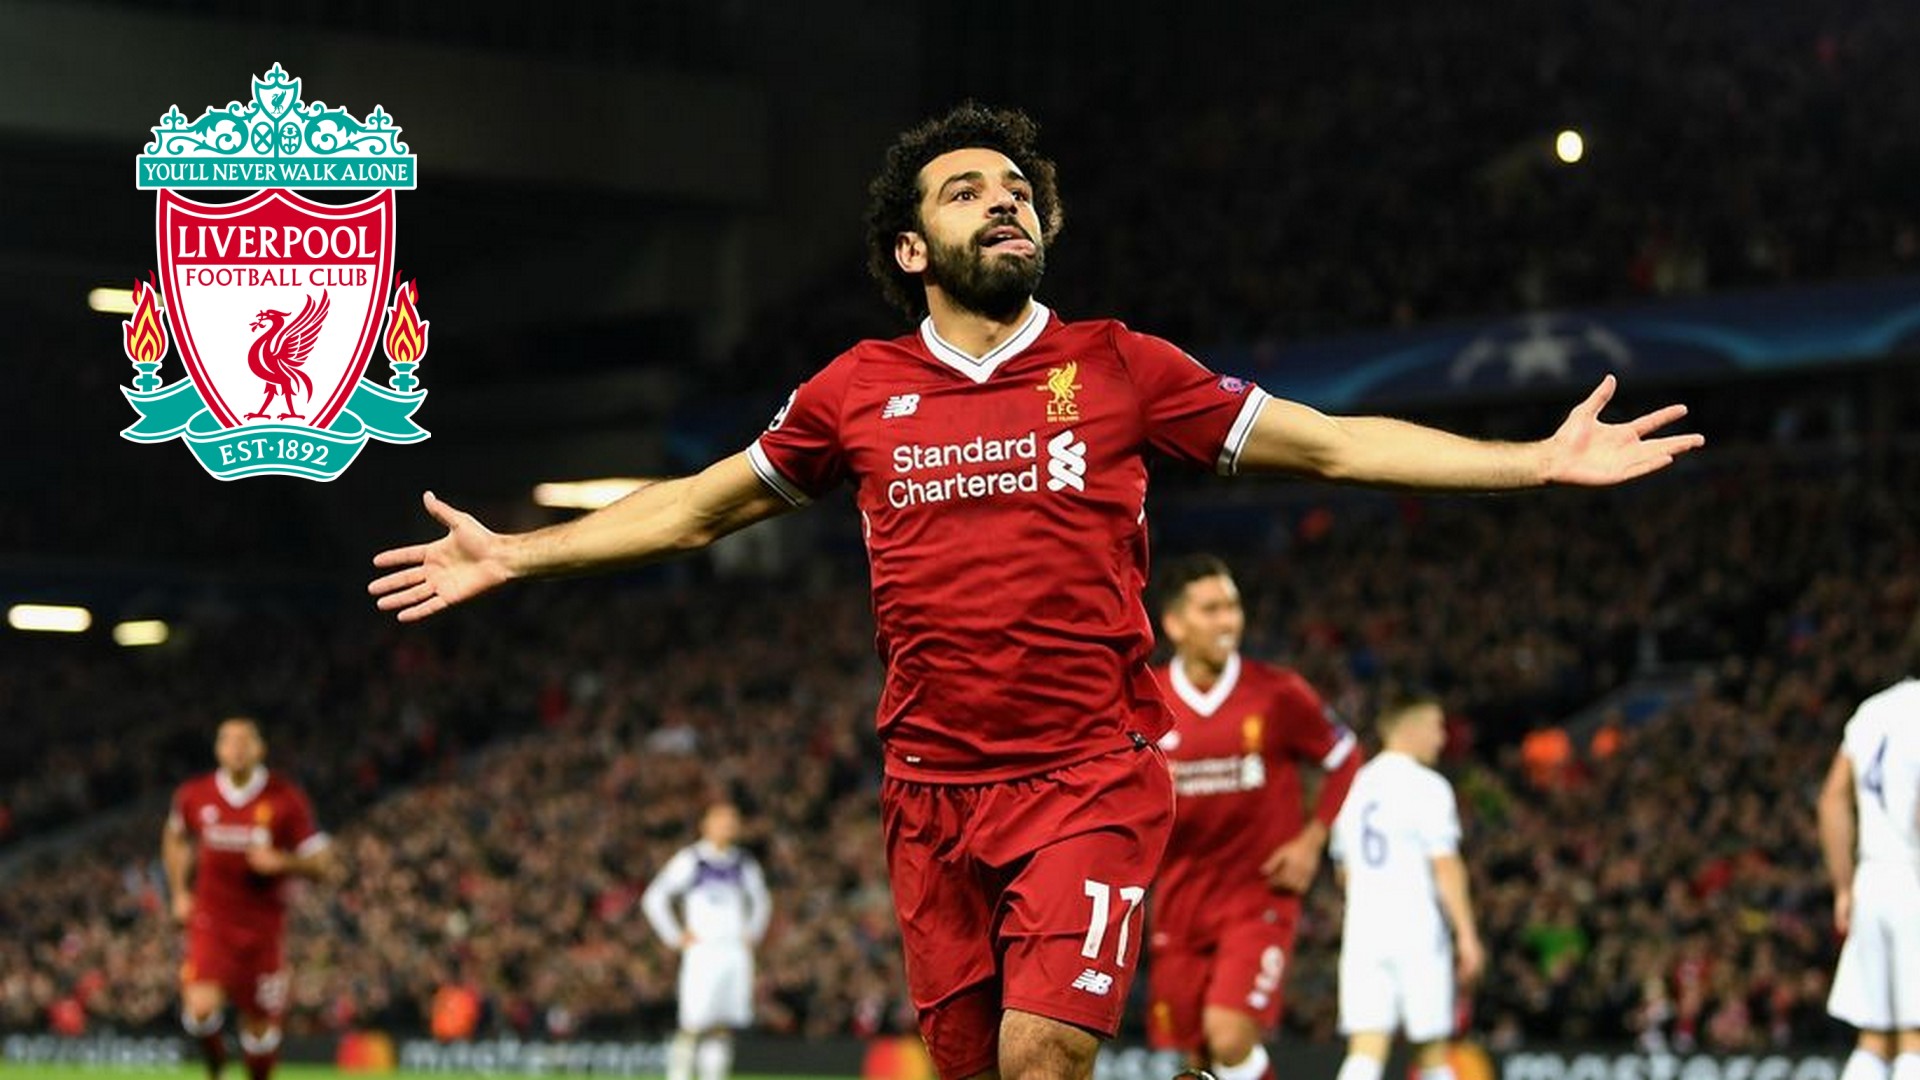 Mohamed Salah Liverpool Wallpaper with image resolution 1920x1080 pixel. You can use this wallpaper as background for your desktop Computer Screensavers, Android or iPhone smartphones